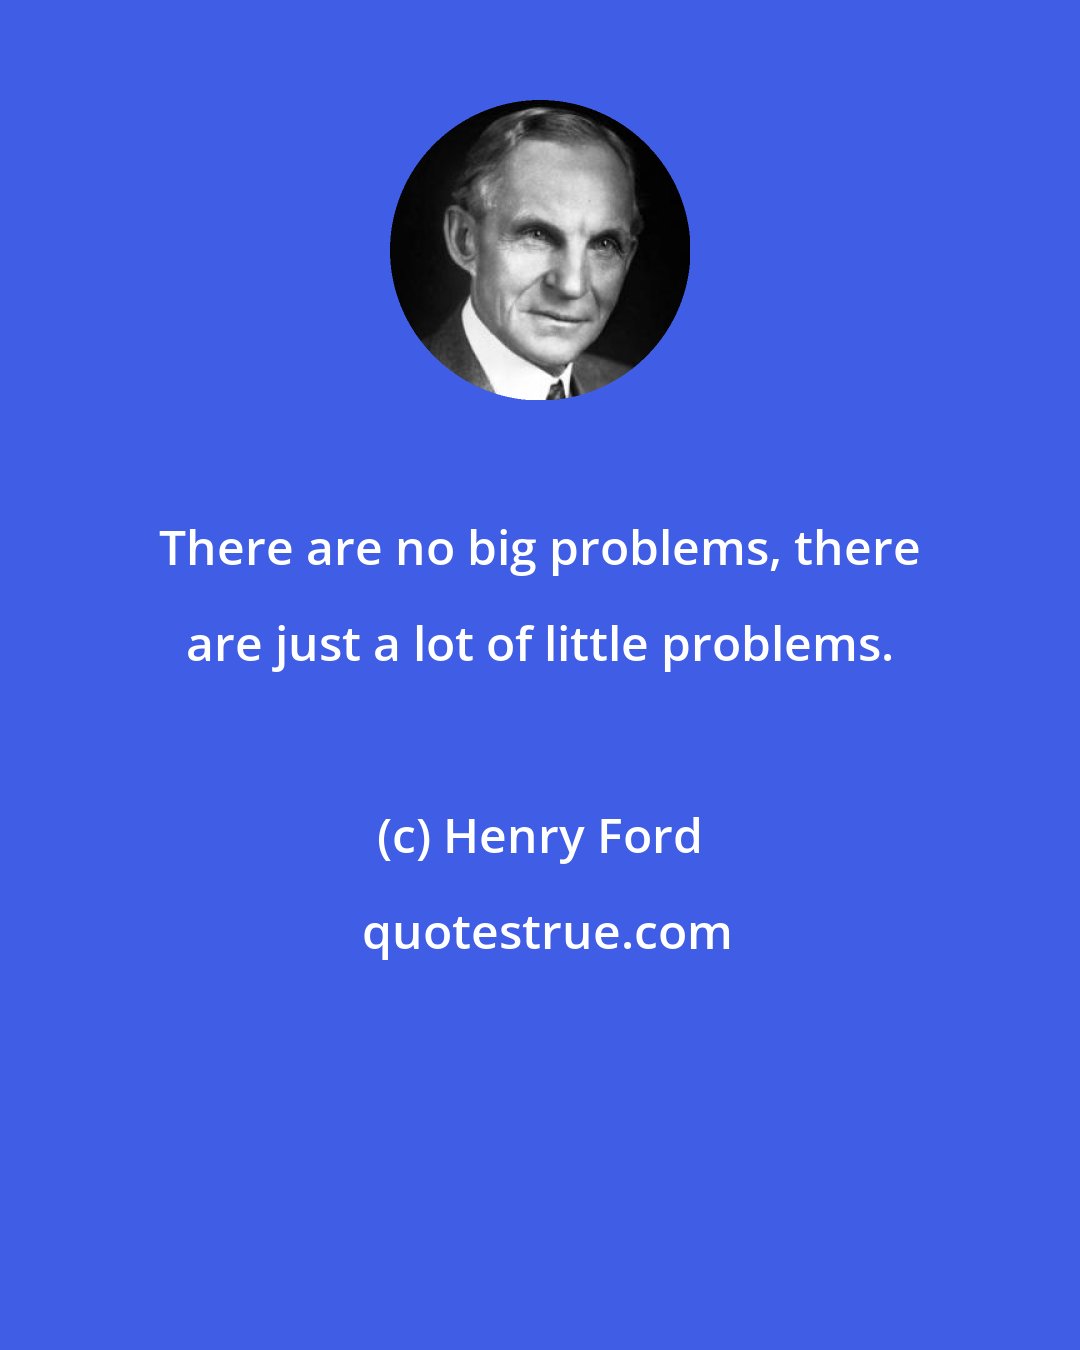 Henry Ford: There are no big problems, there are just a lot of little problems.